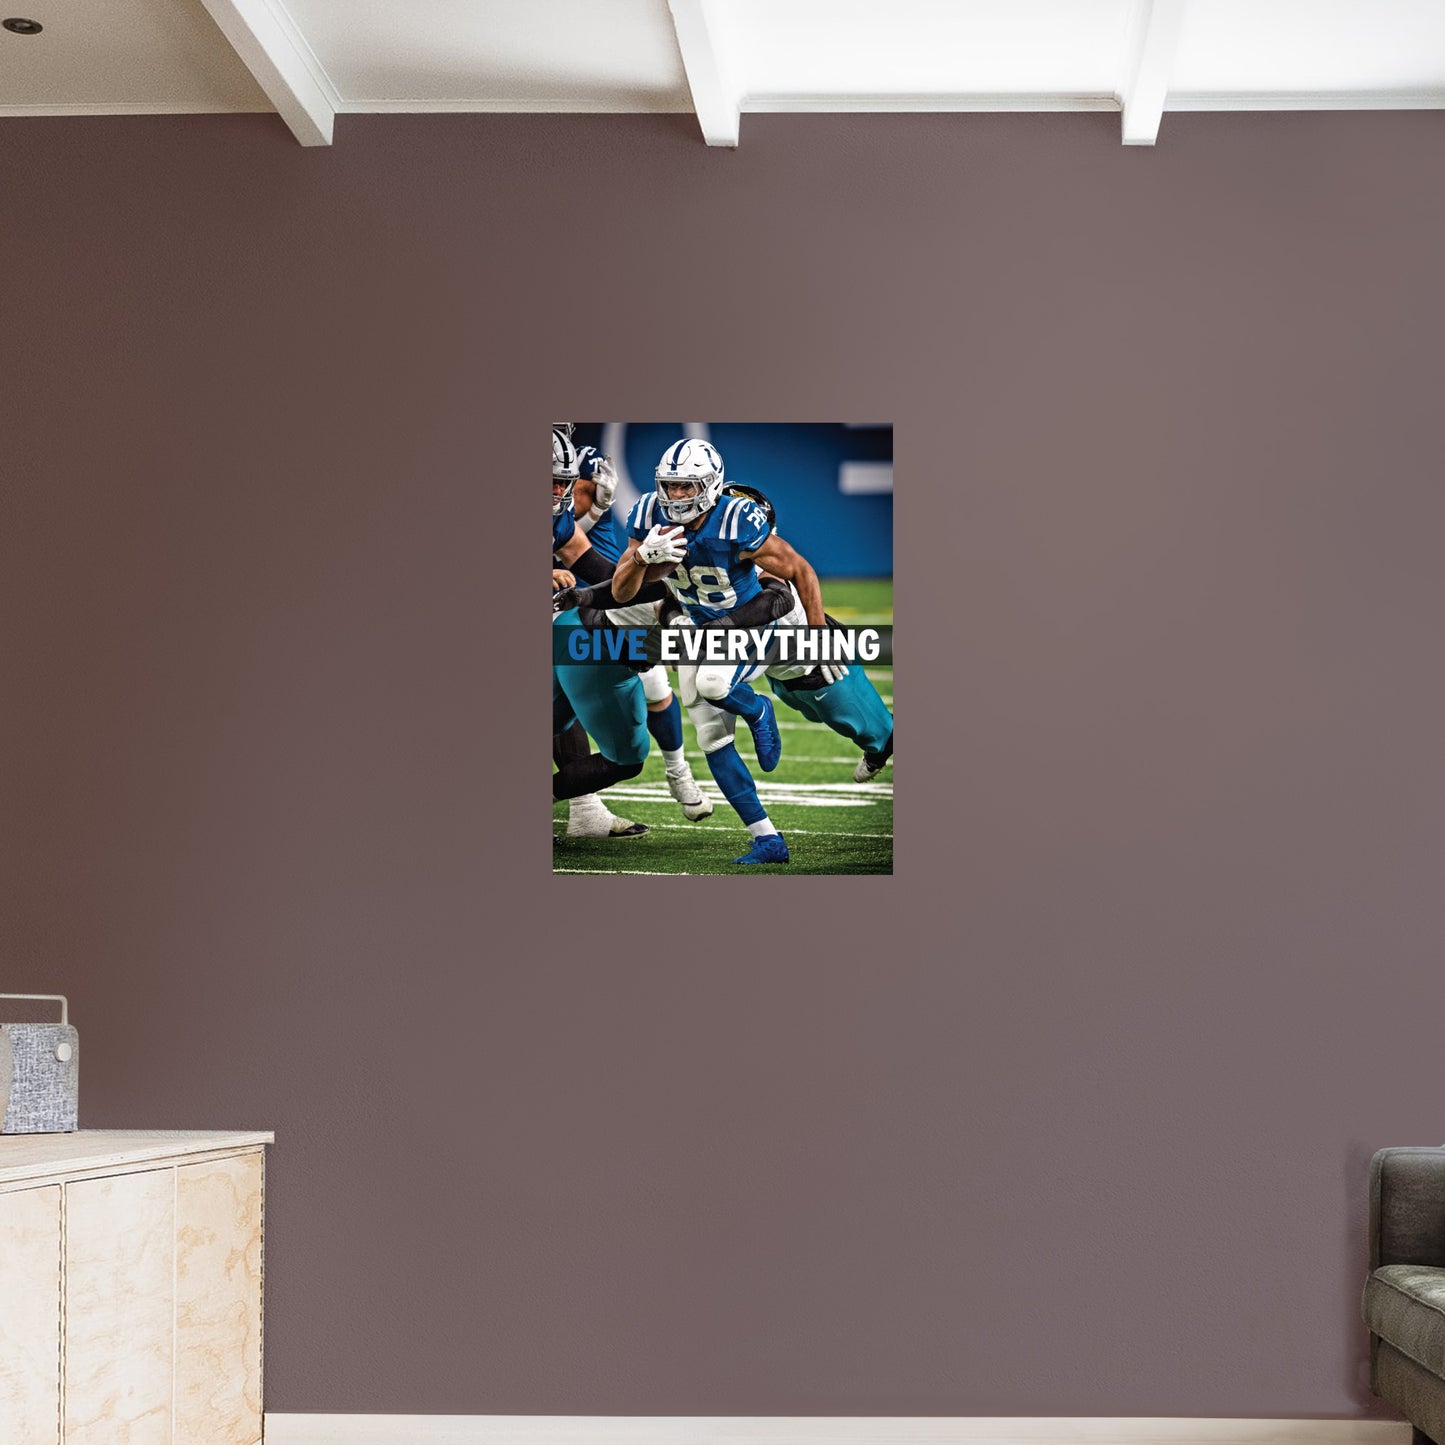 Indianapolis Colts: Jonathan Taylor  Motivational Poster        - Officially Licensed NFL Removable     Adhesive Decal